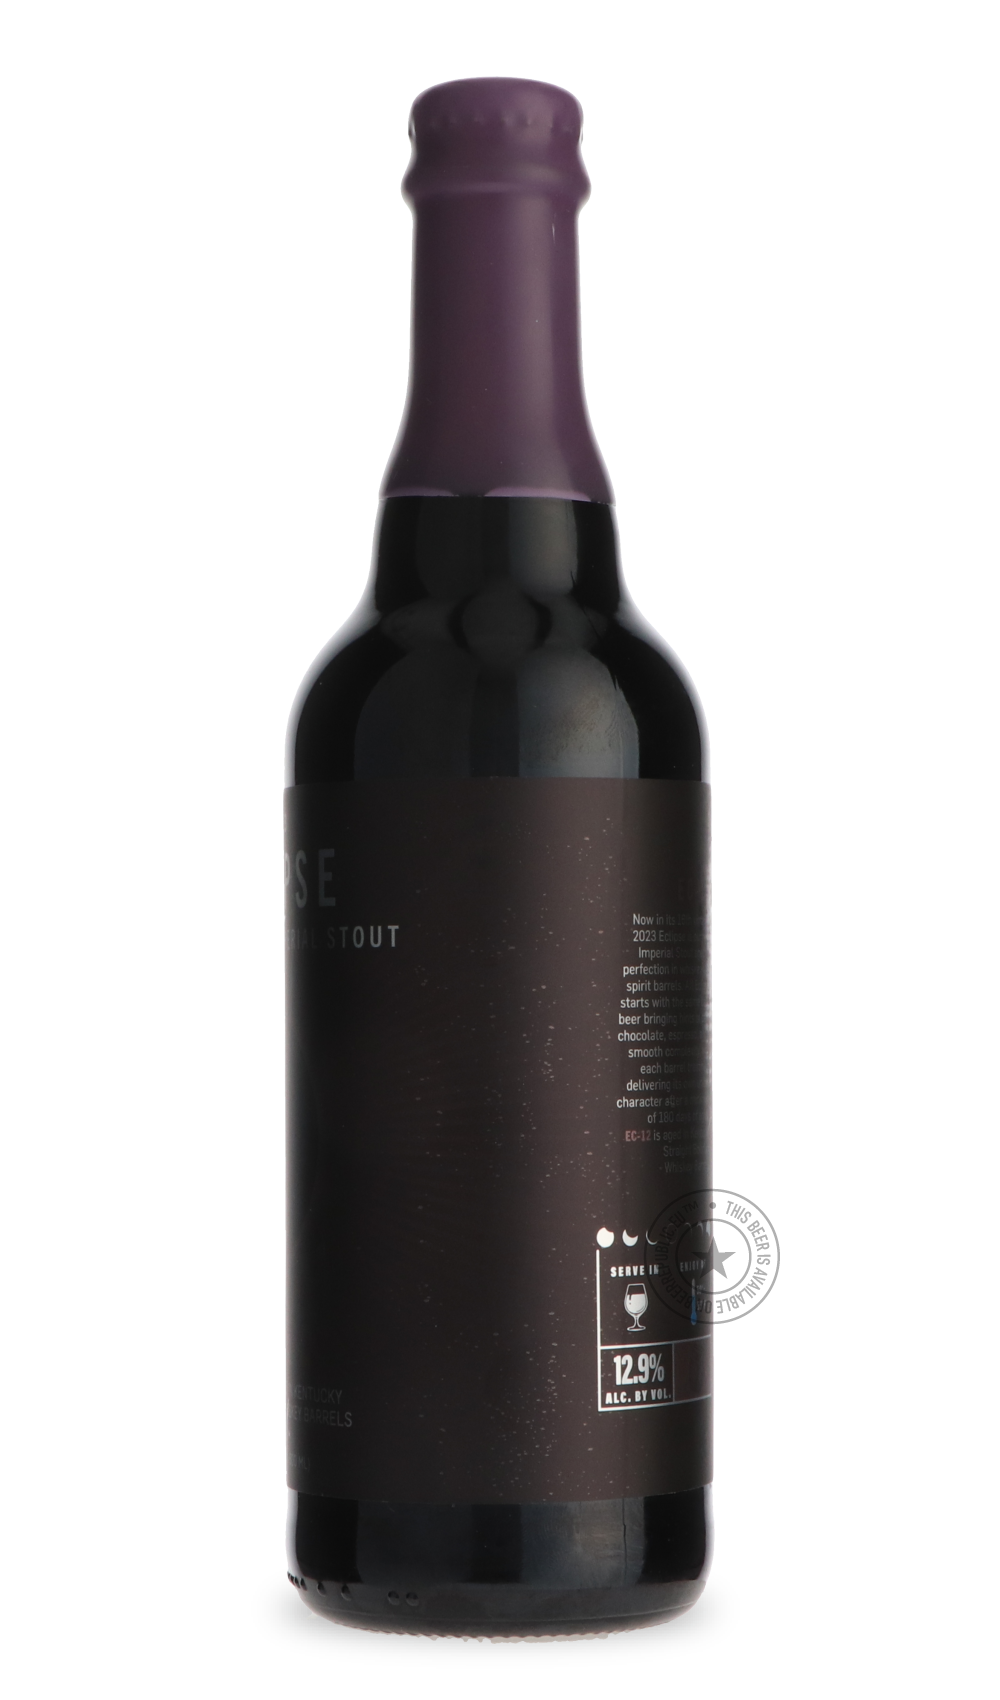 -FiftyFifty- Eclipse - Elijah Craig (2023)-Stout & Porter- Only @ Beer Republic - The best online beer store for American & Canadian craft beer - Buy beer online from the USA and Canada - Bier online kopen - Amerikaans bier kopen - Craft beer store - Craft beer kopen - Amerikanisch bier kaufen - Bier online kaufen - Acheter biere online - IPA - Stout - Porter - New England IPA - Hazy IPA - Imperial Stout - Barrel Aged - Barrel Aged Imperial Stout - Brown - Dark beer - Blond - Blonde - Pilsner - Lager - Whea